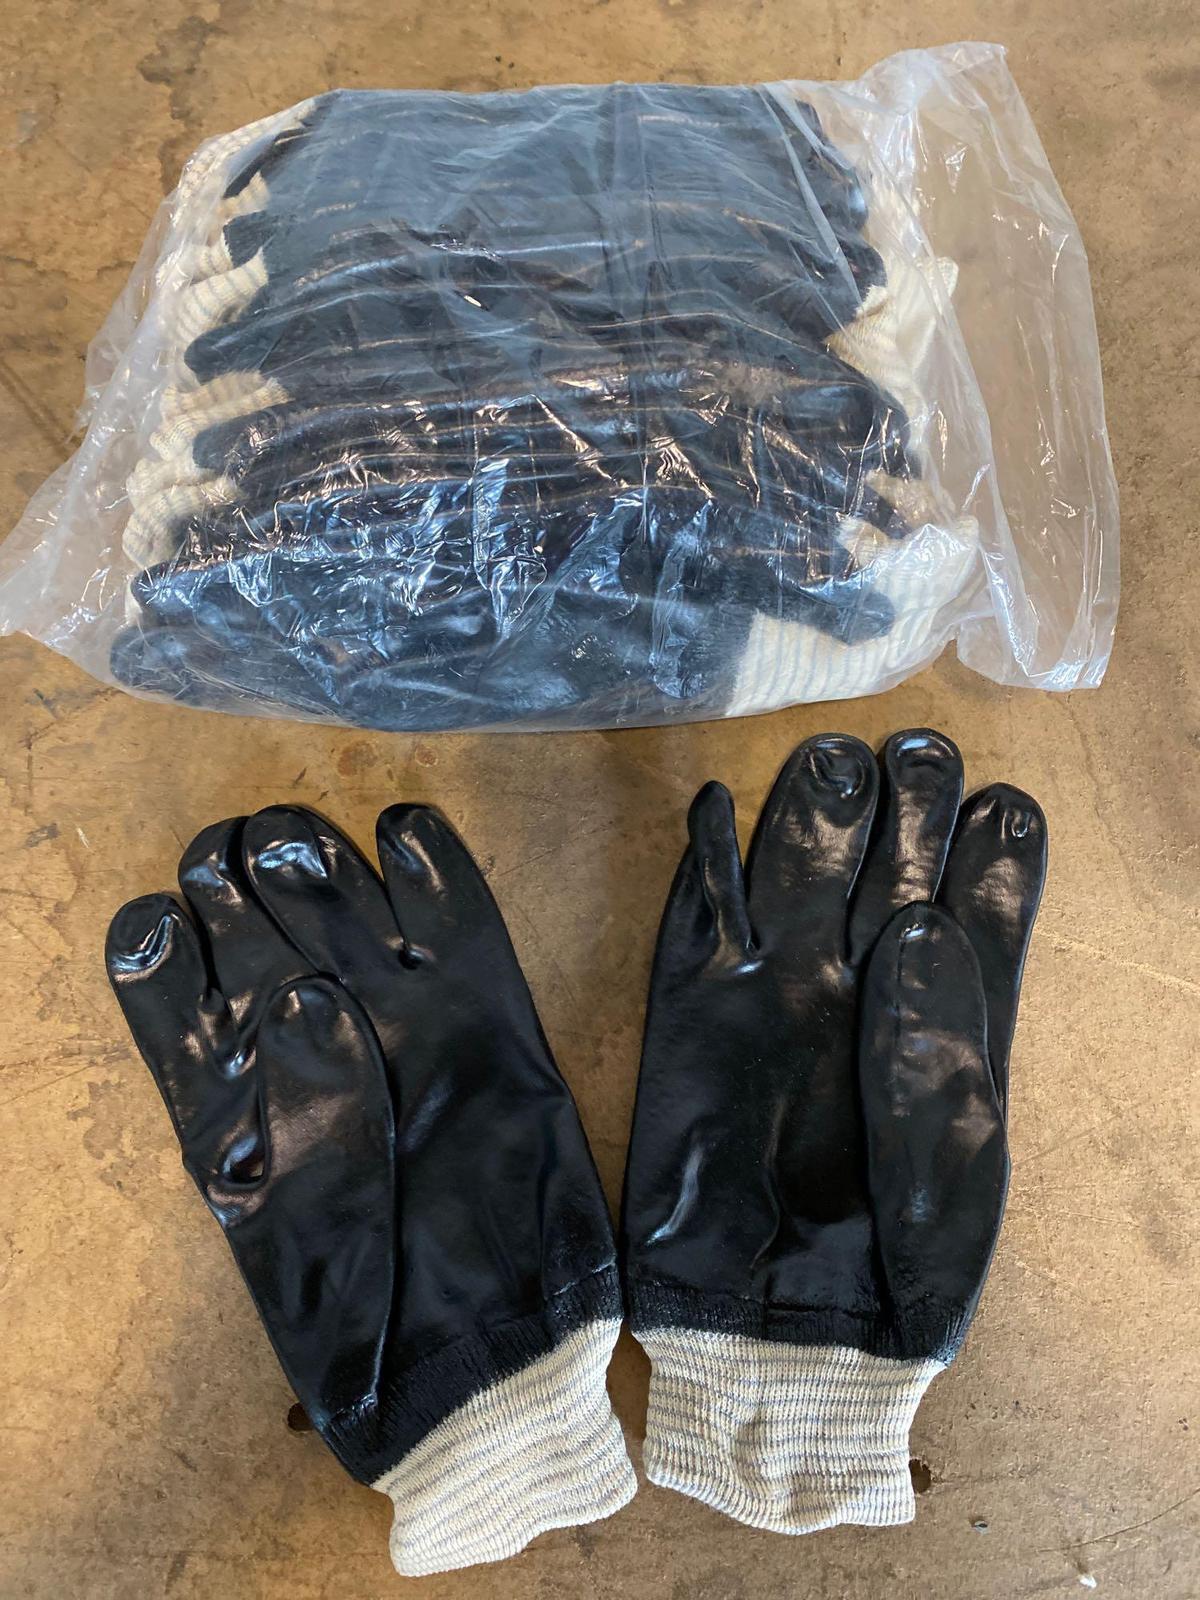 (12) New Pair of PVC Coated Work Gloves